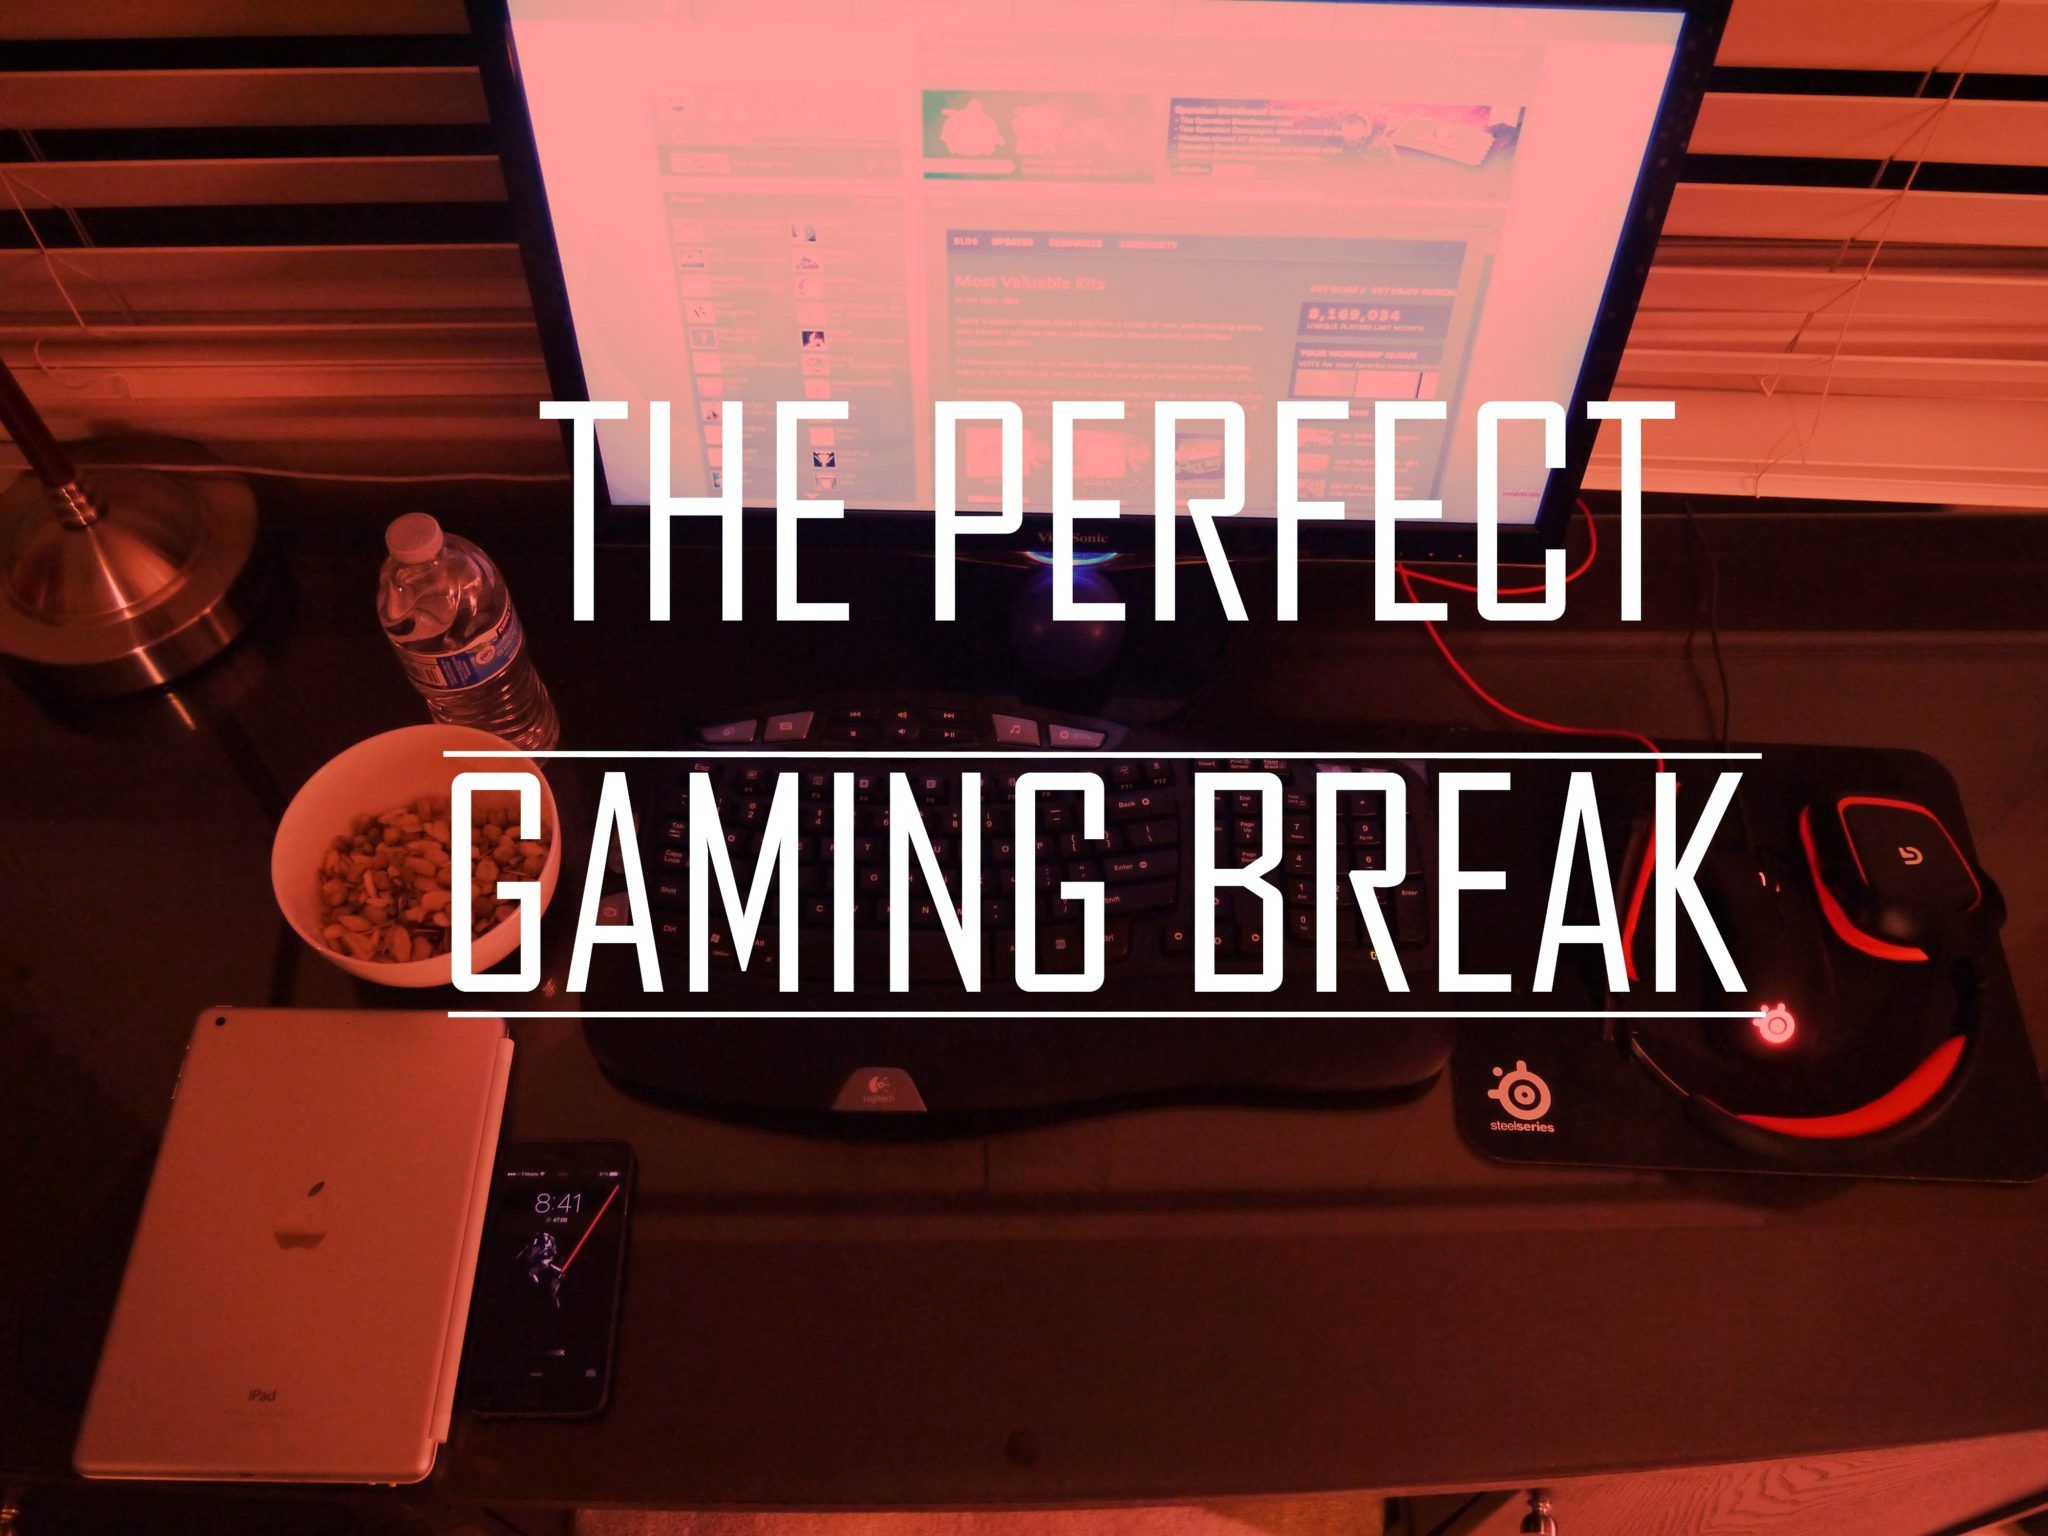 Why You Should Take Breaks While Gaming